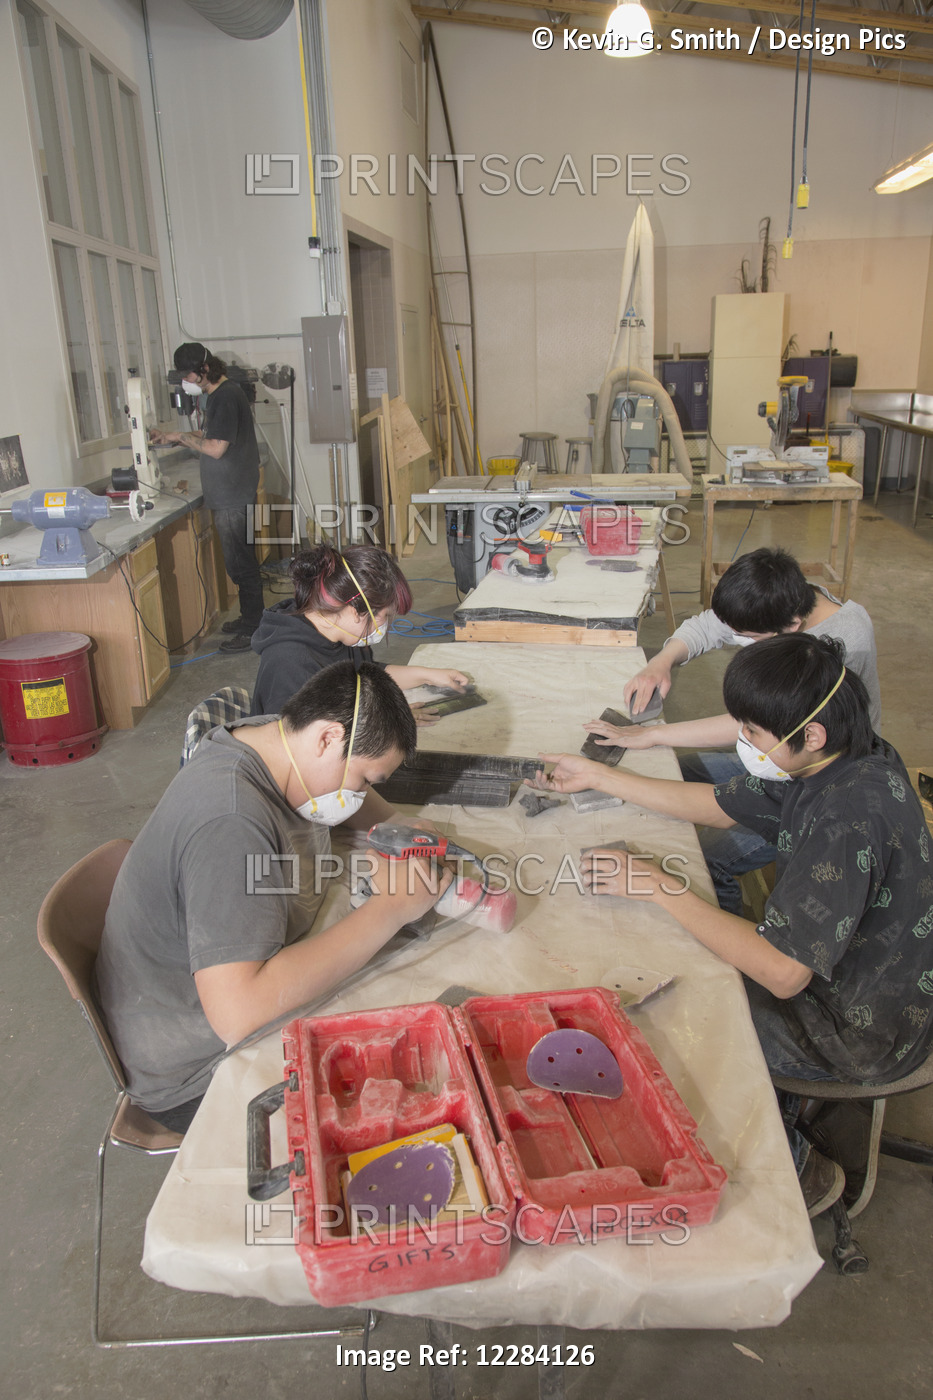 Native Alaskan Youth Wearing Respirators Use Sanders To Work On Art Projects At ...